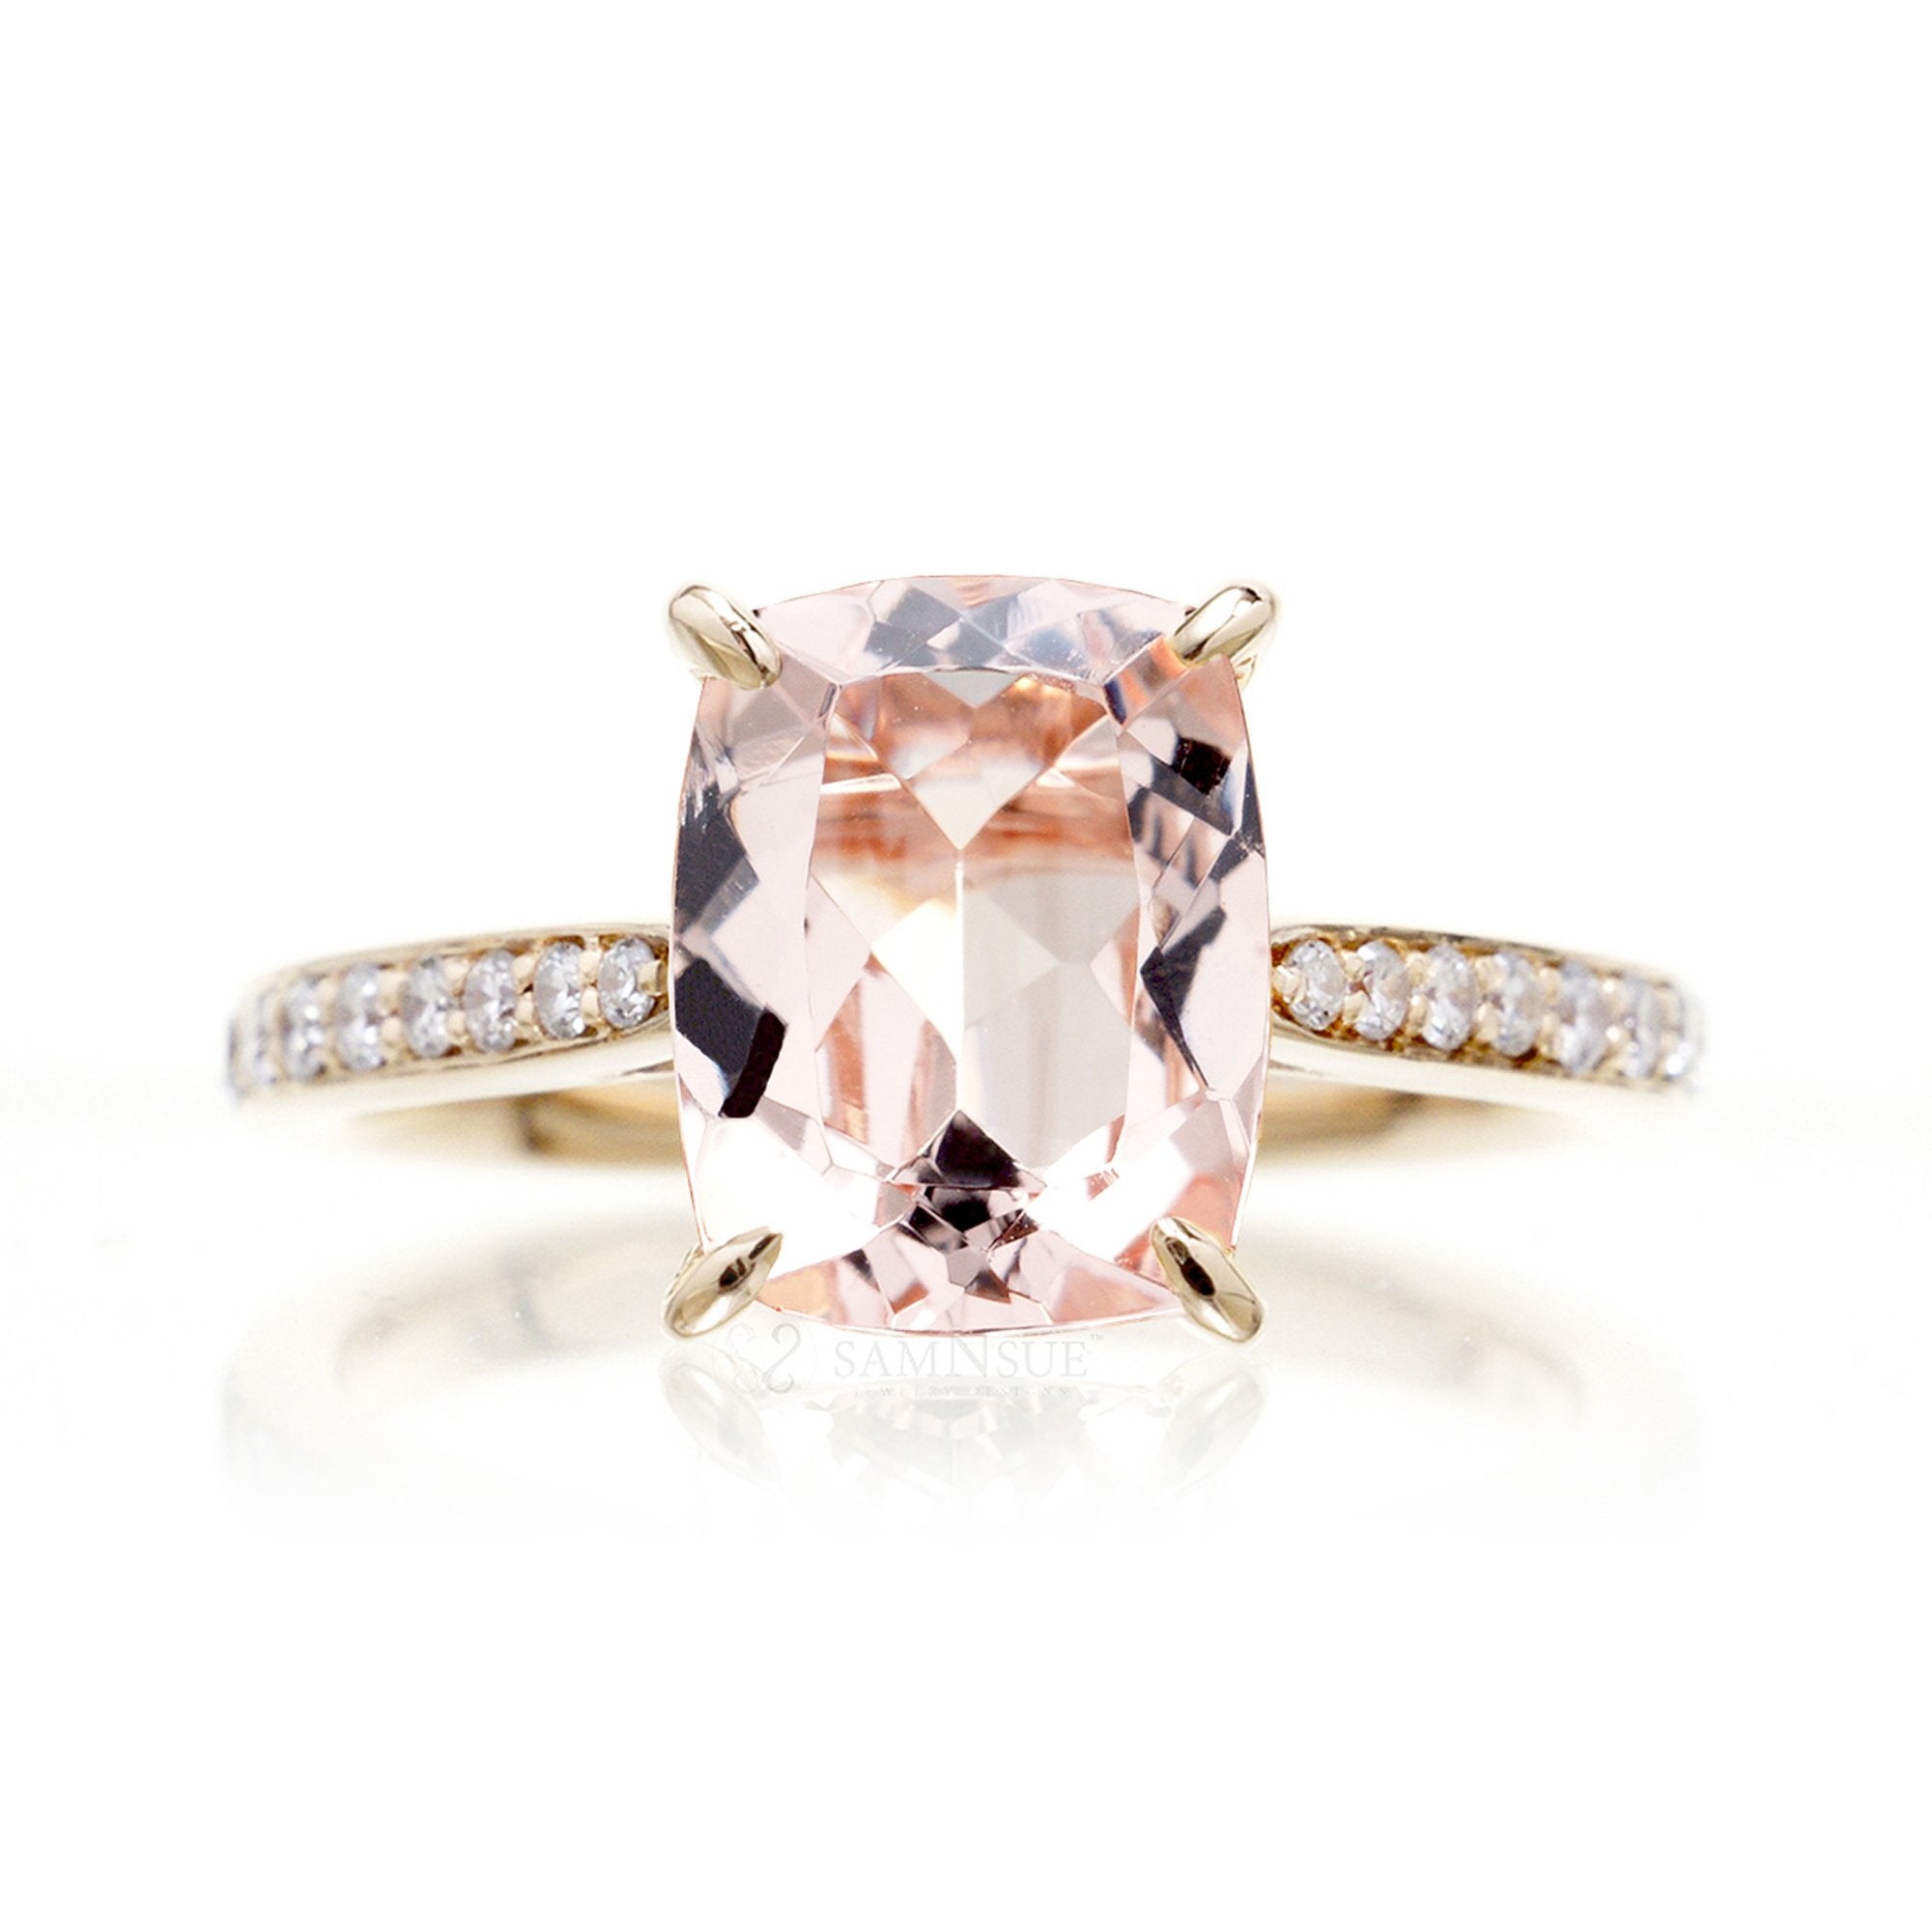 Cushion morganite ring with diamond band in yellow gold